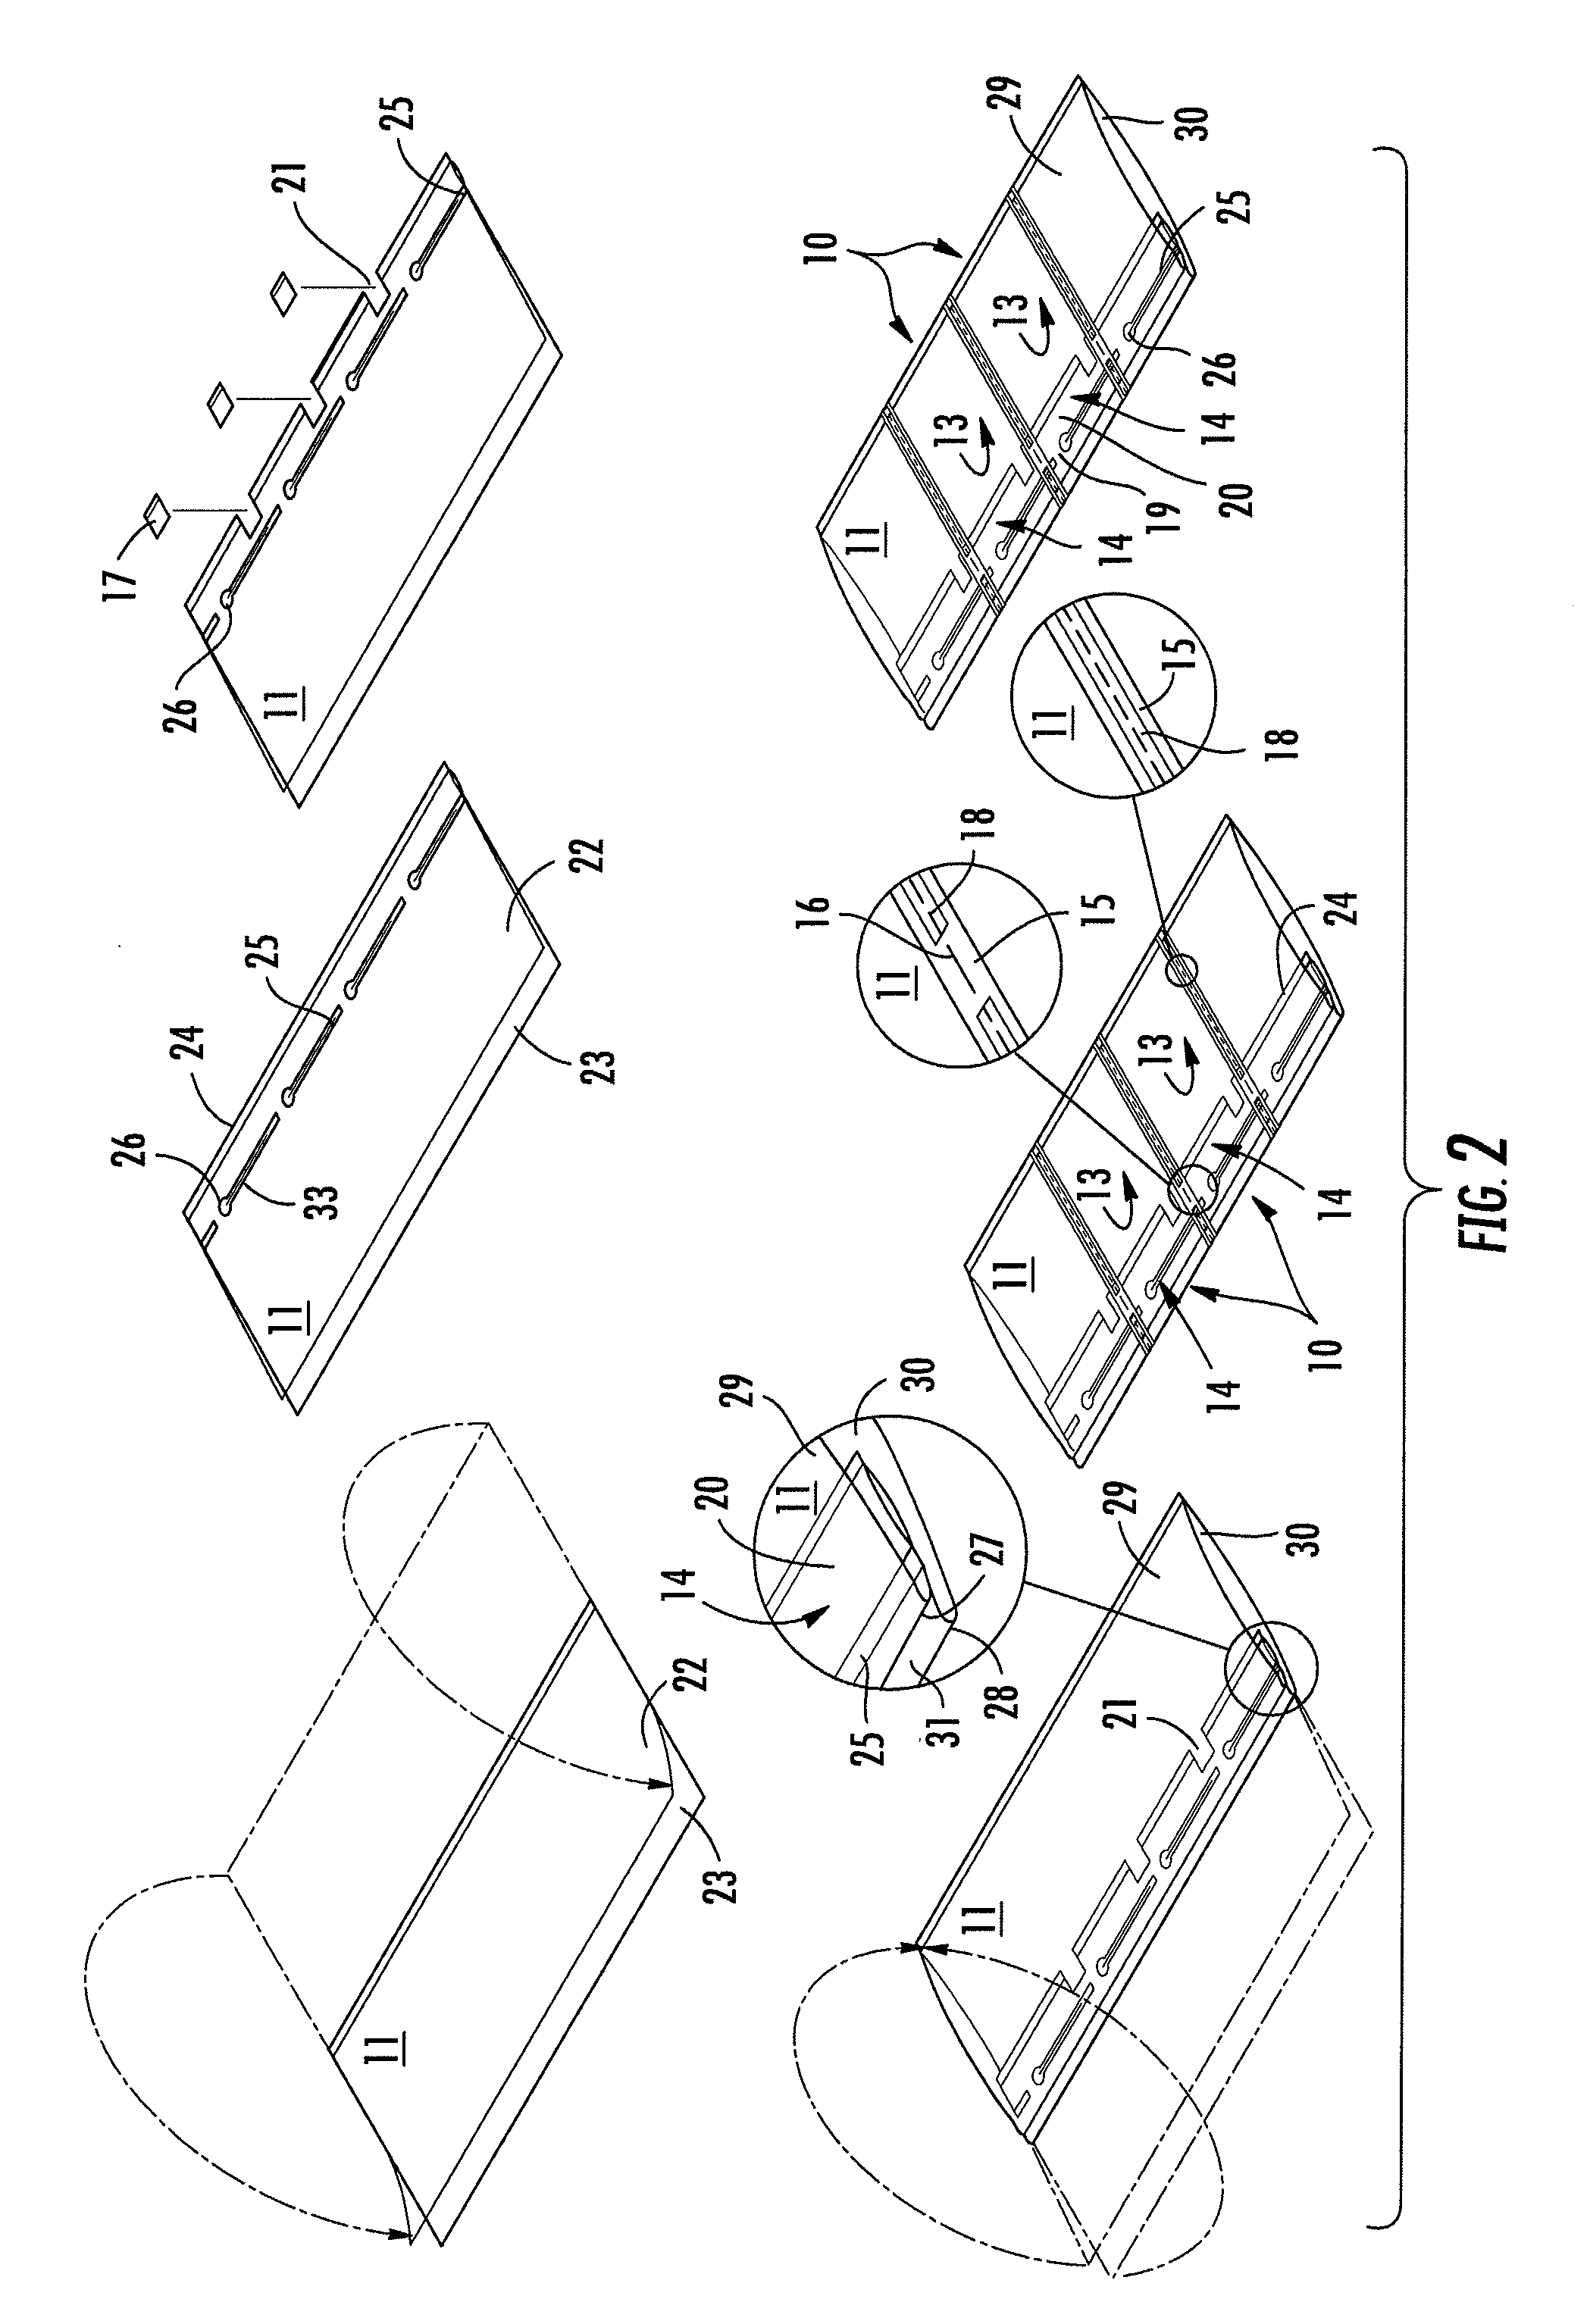 Inflatable Structure For Packaging And Associated Apparatus And Method